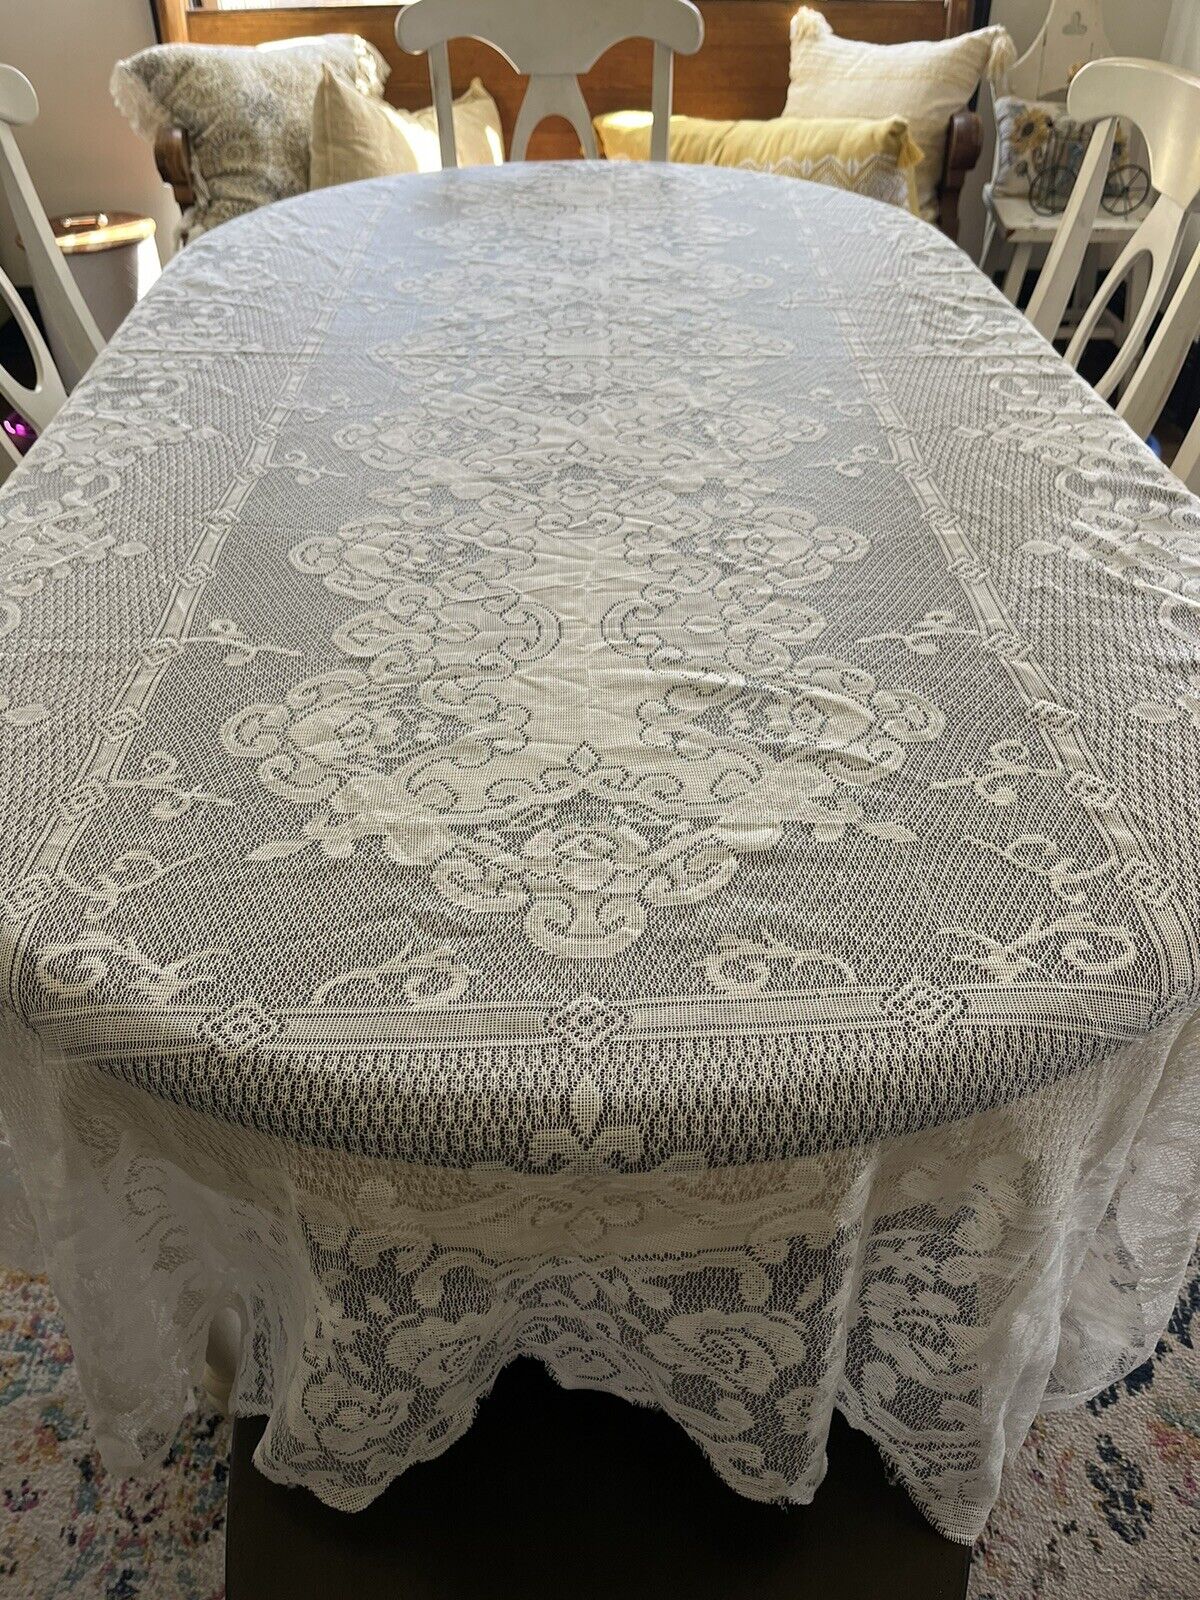 Vintage Laura Ashley Lace Tablecloth Shabby Approx 100” X 56” Rectangle 